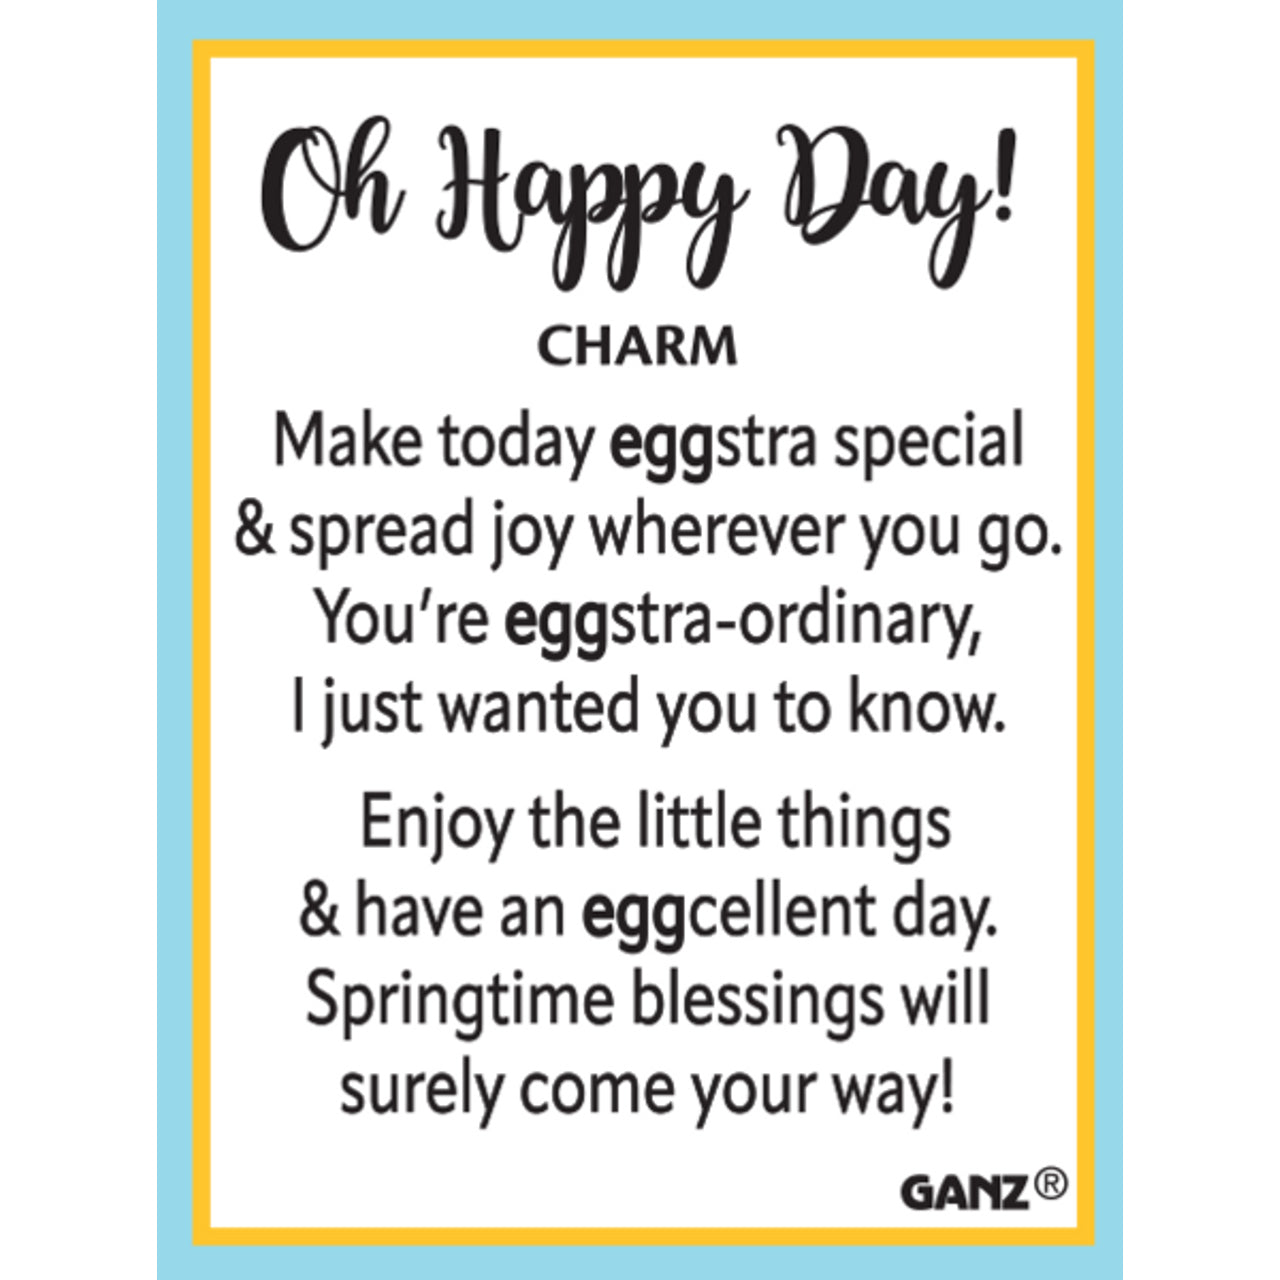 Oh Happy Day-Egg Charms